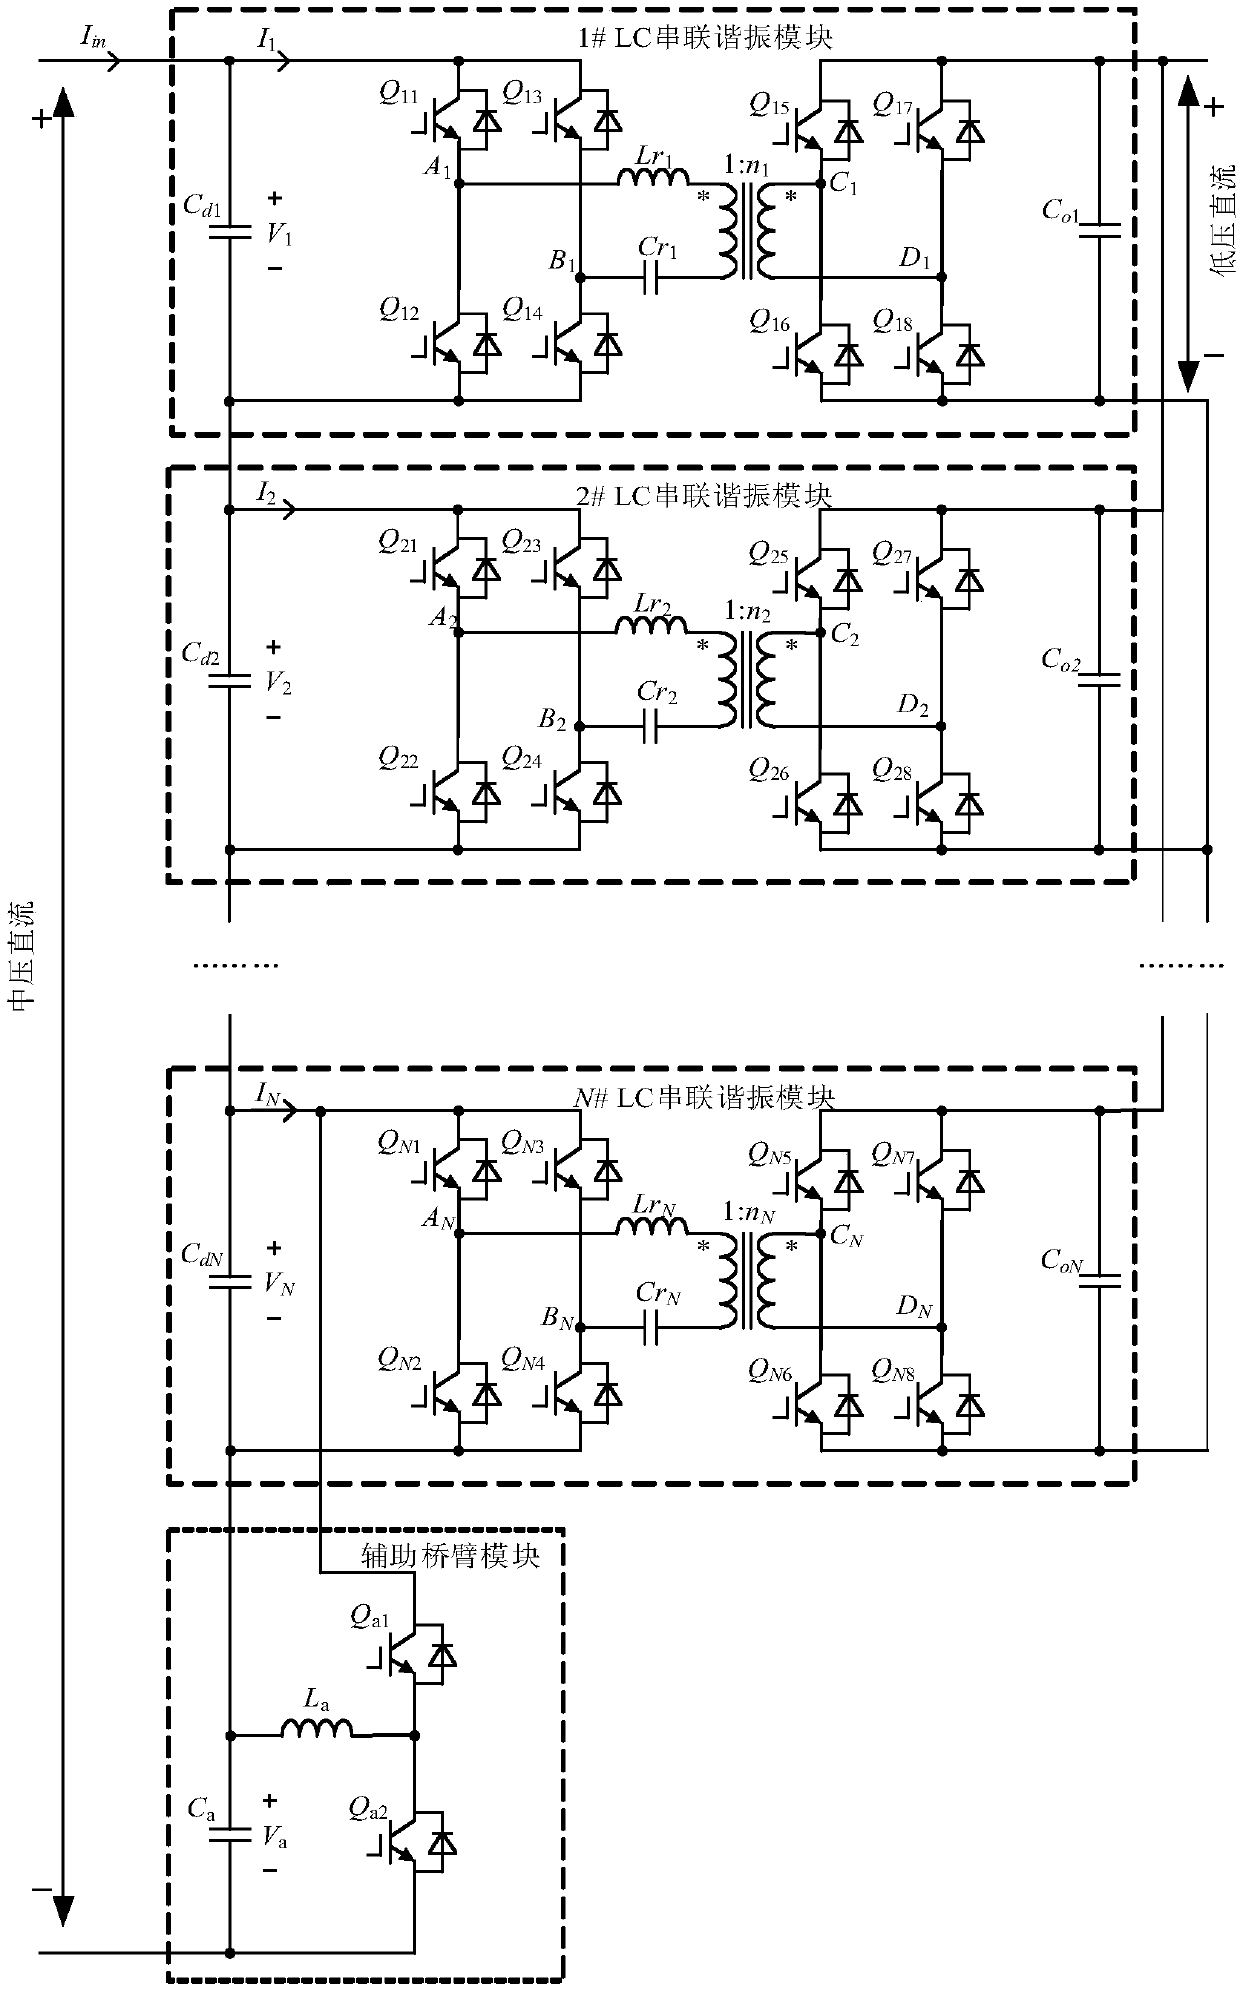 LC input series connection output parallel connection direct current transformer with power capable of being adjusted and control method thereof